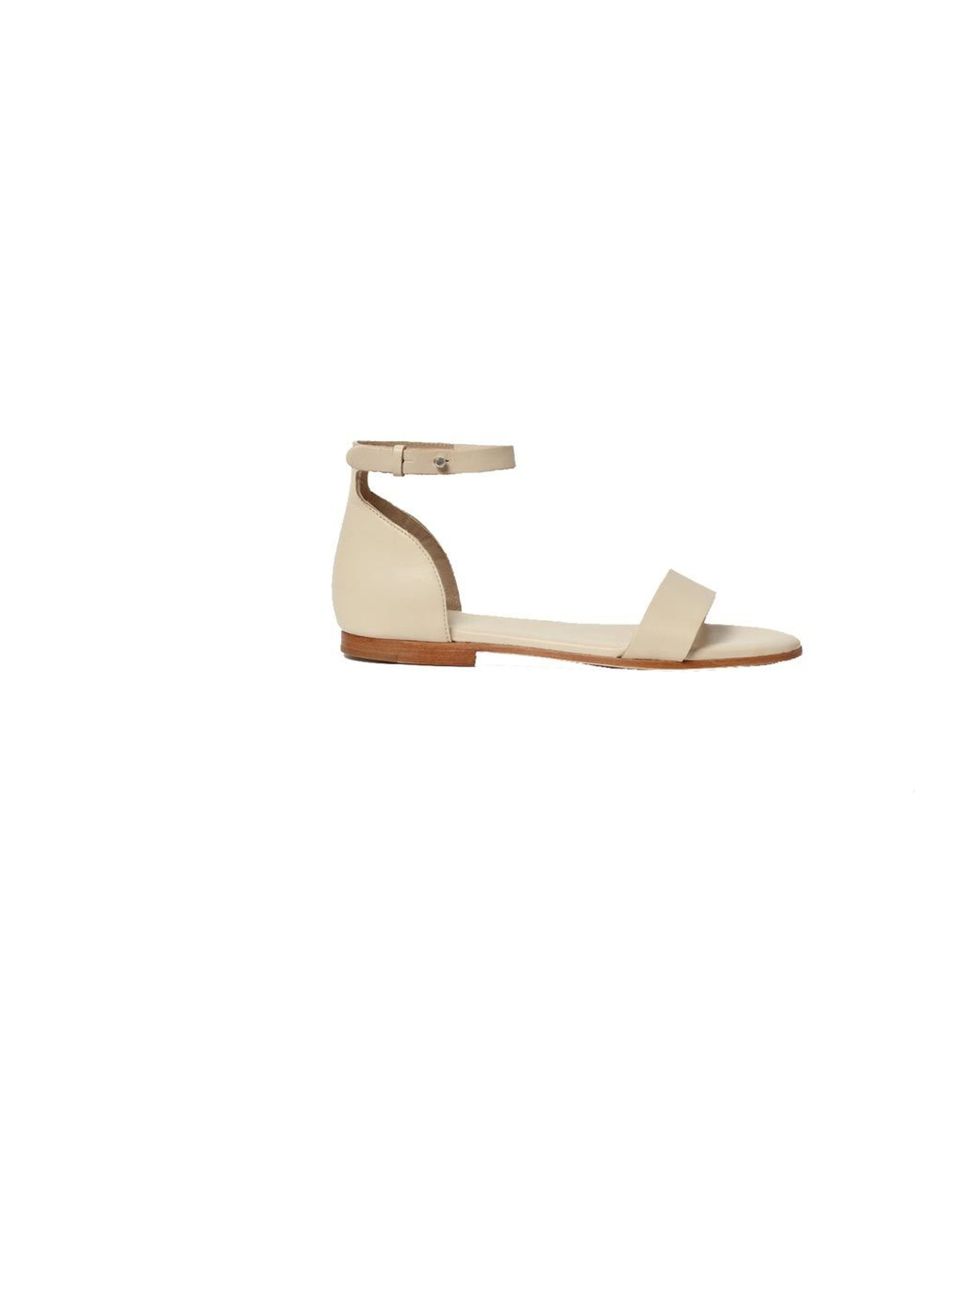 <p><a href="http://www.cosstores.com/Store/Women/New/Leather_sandals/365246-379769.1">Cos</a> leather sandals, £70</p>